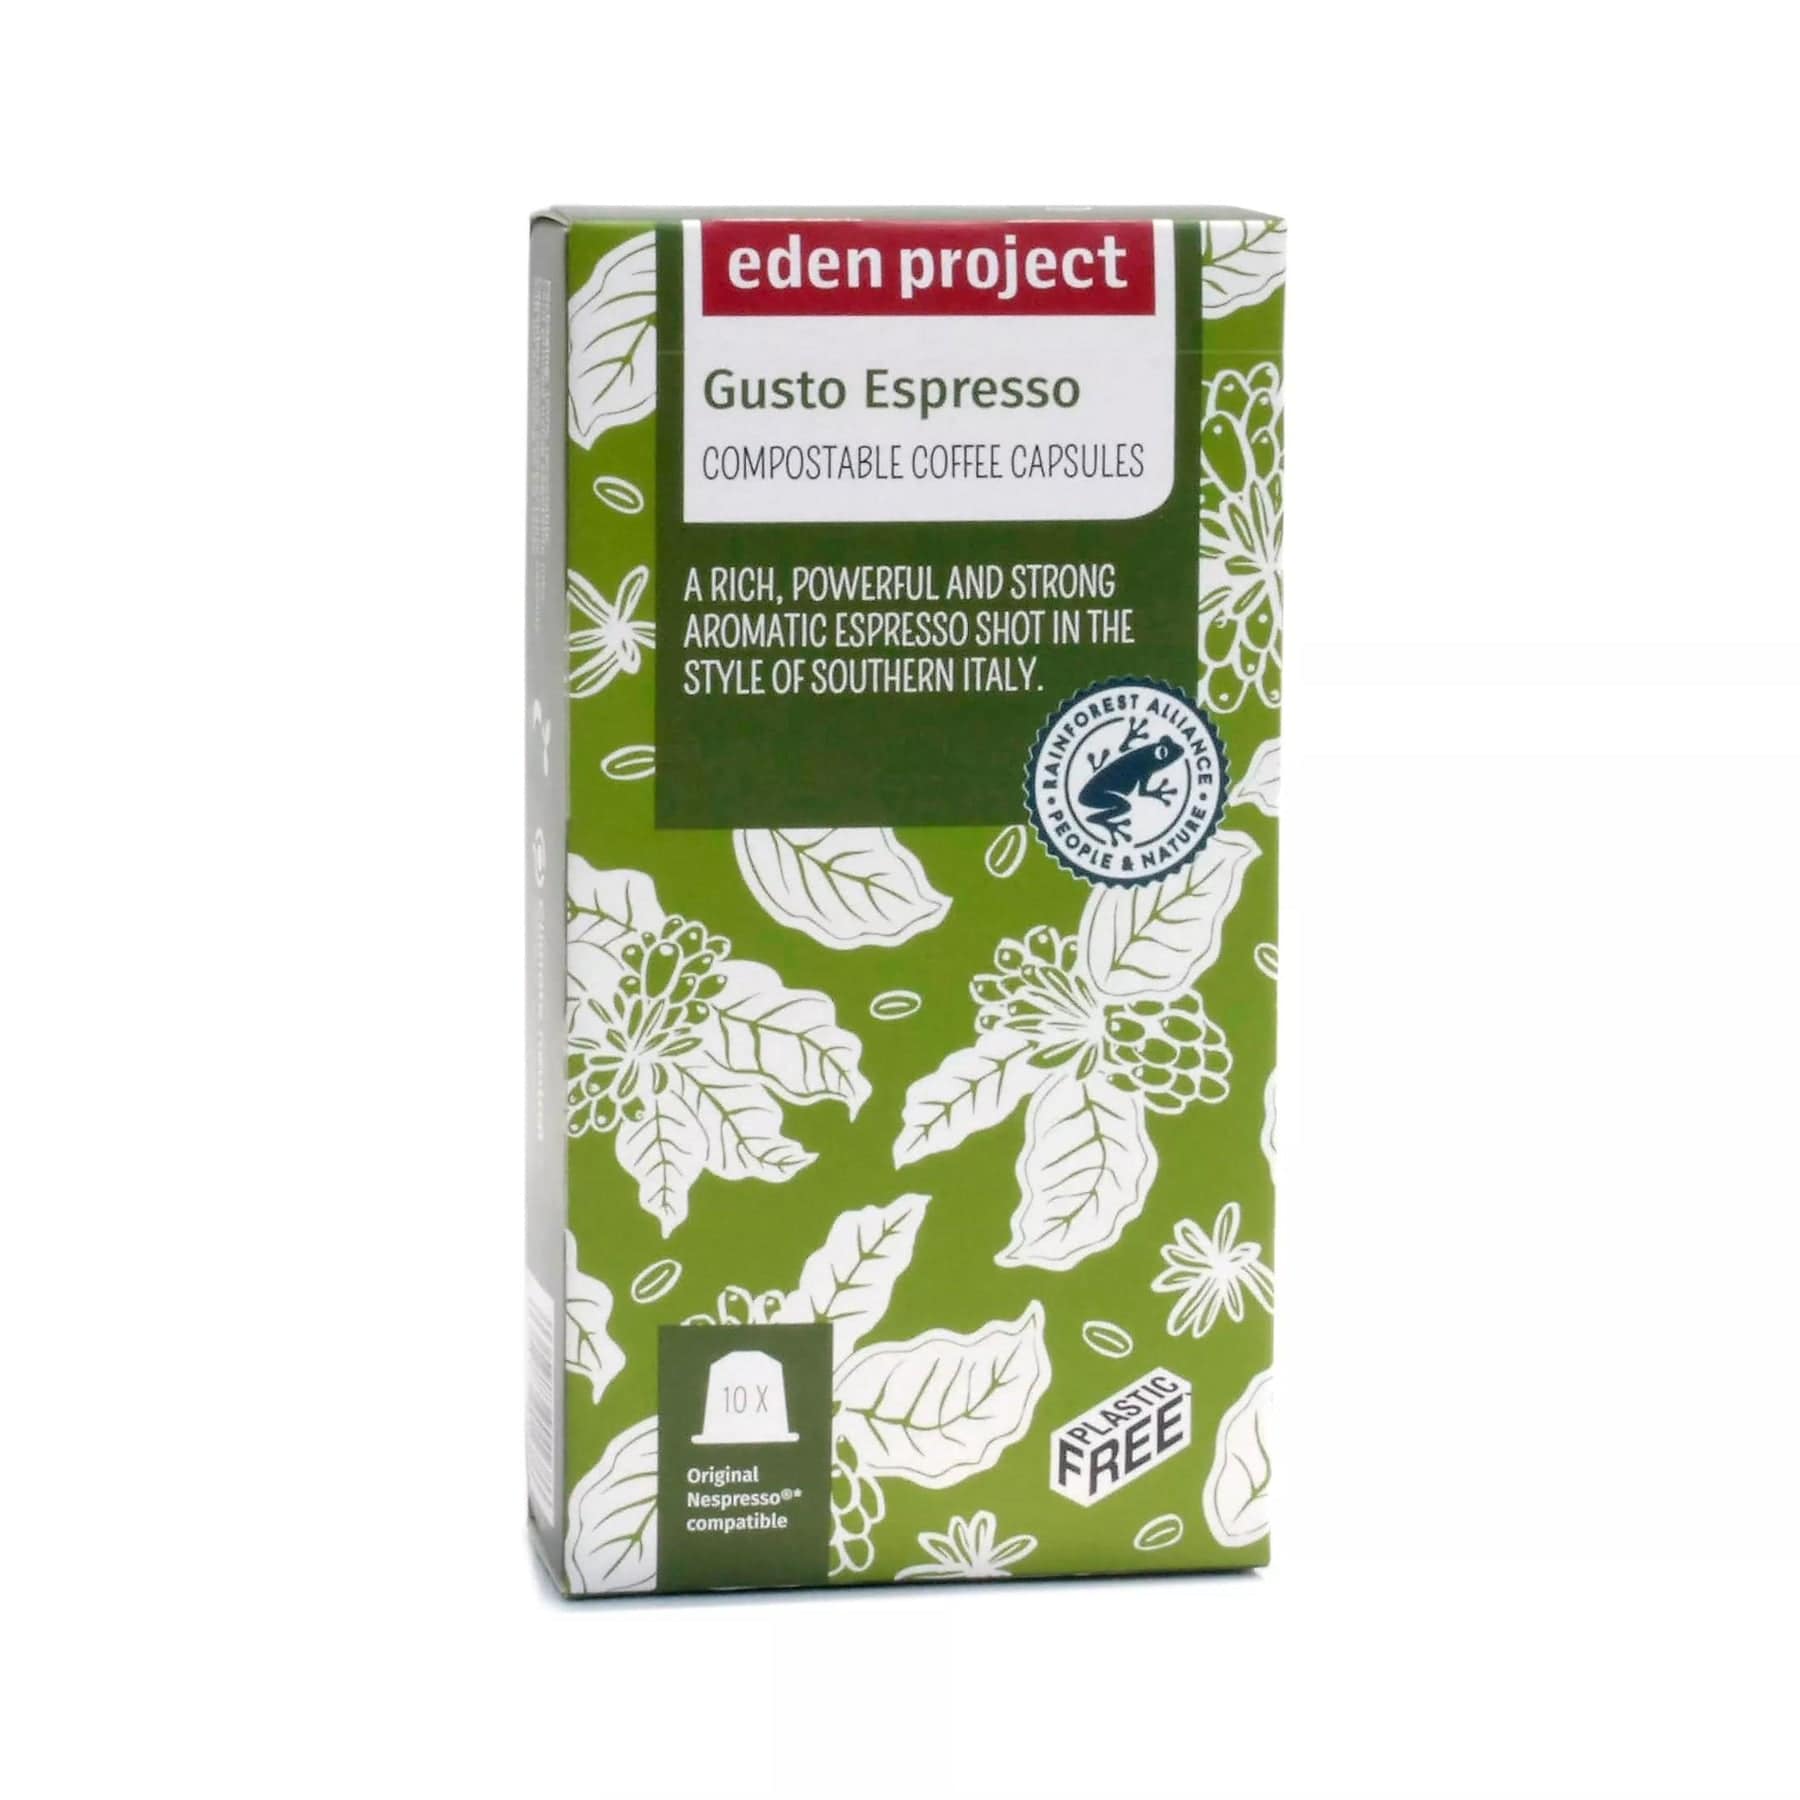 Eden Project Gusto Espresso compostable coffee capsules packaging, with Rainforest Alliance Certification, featuring floral design, highlighting aromatic espresso style of Southern Italy and Nespresso compatibility.